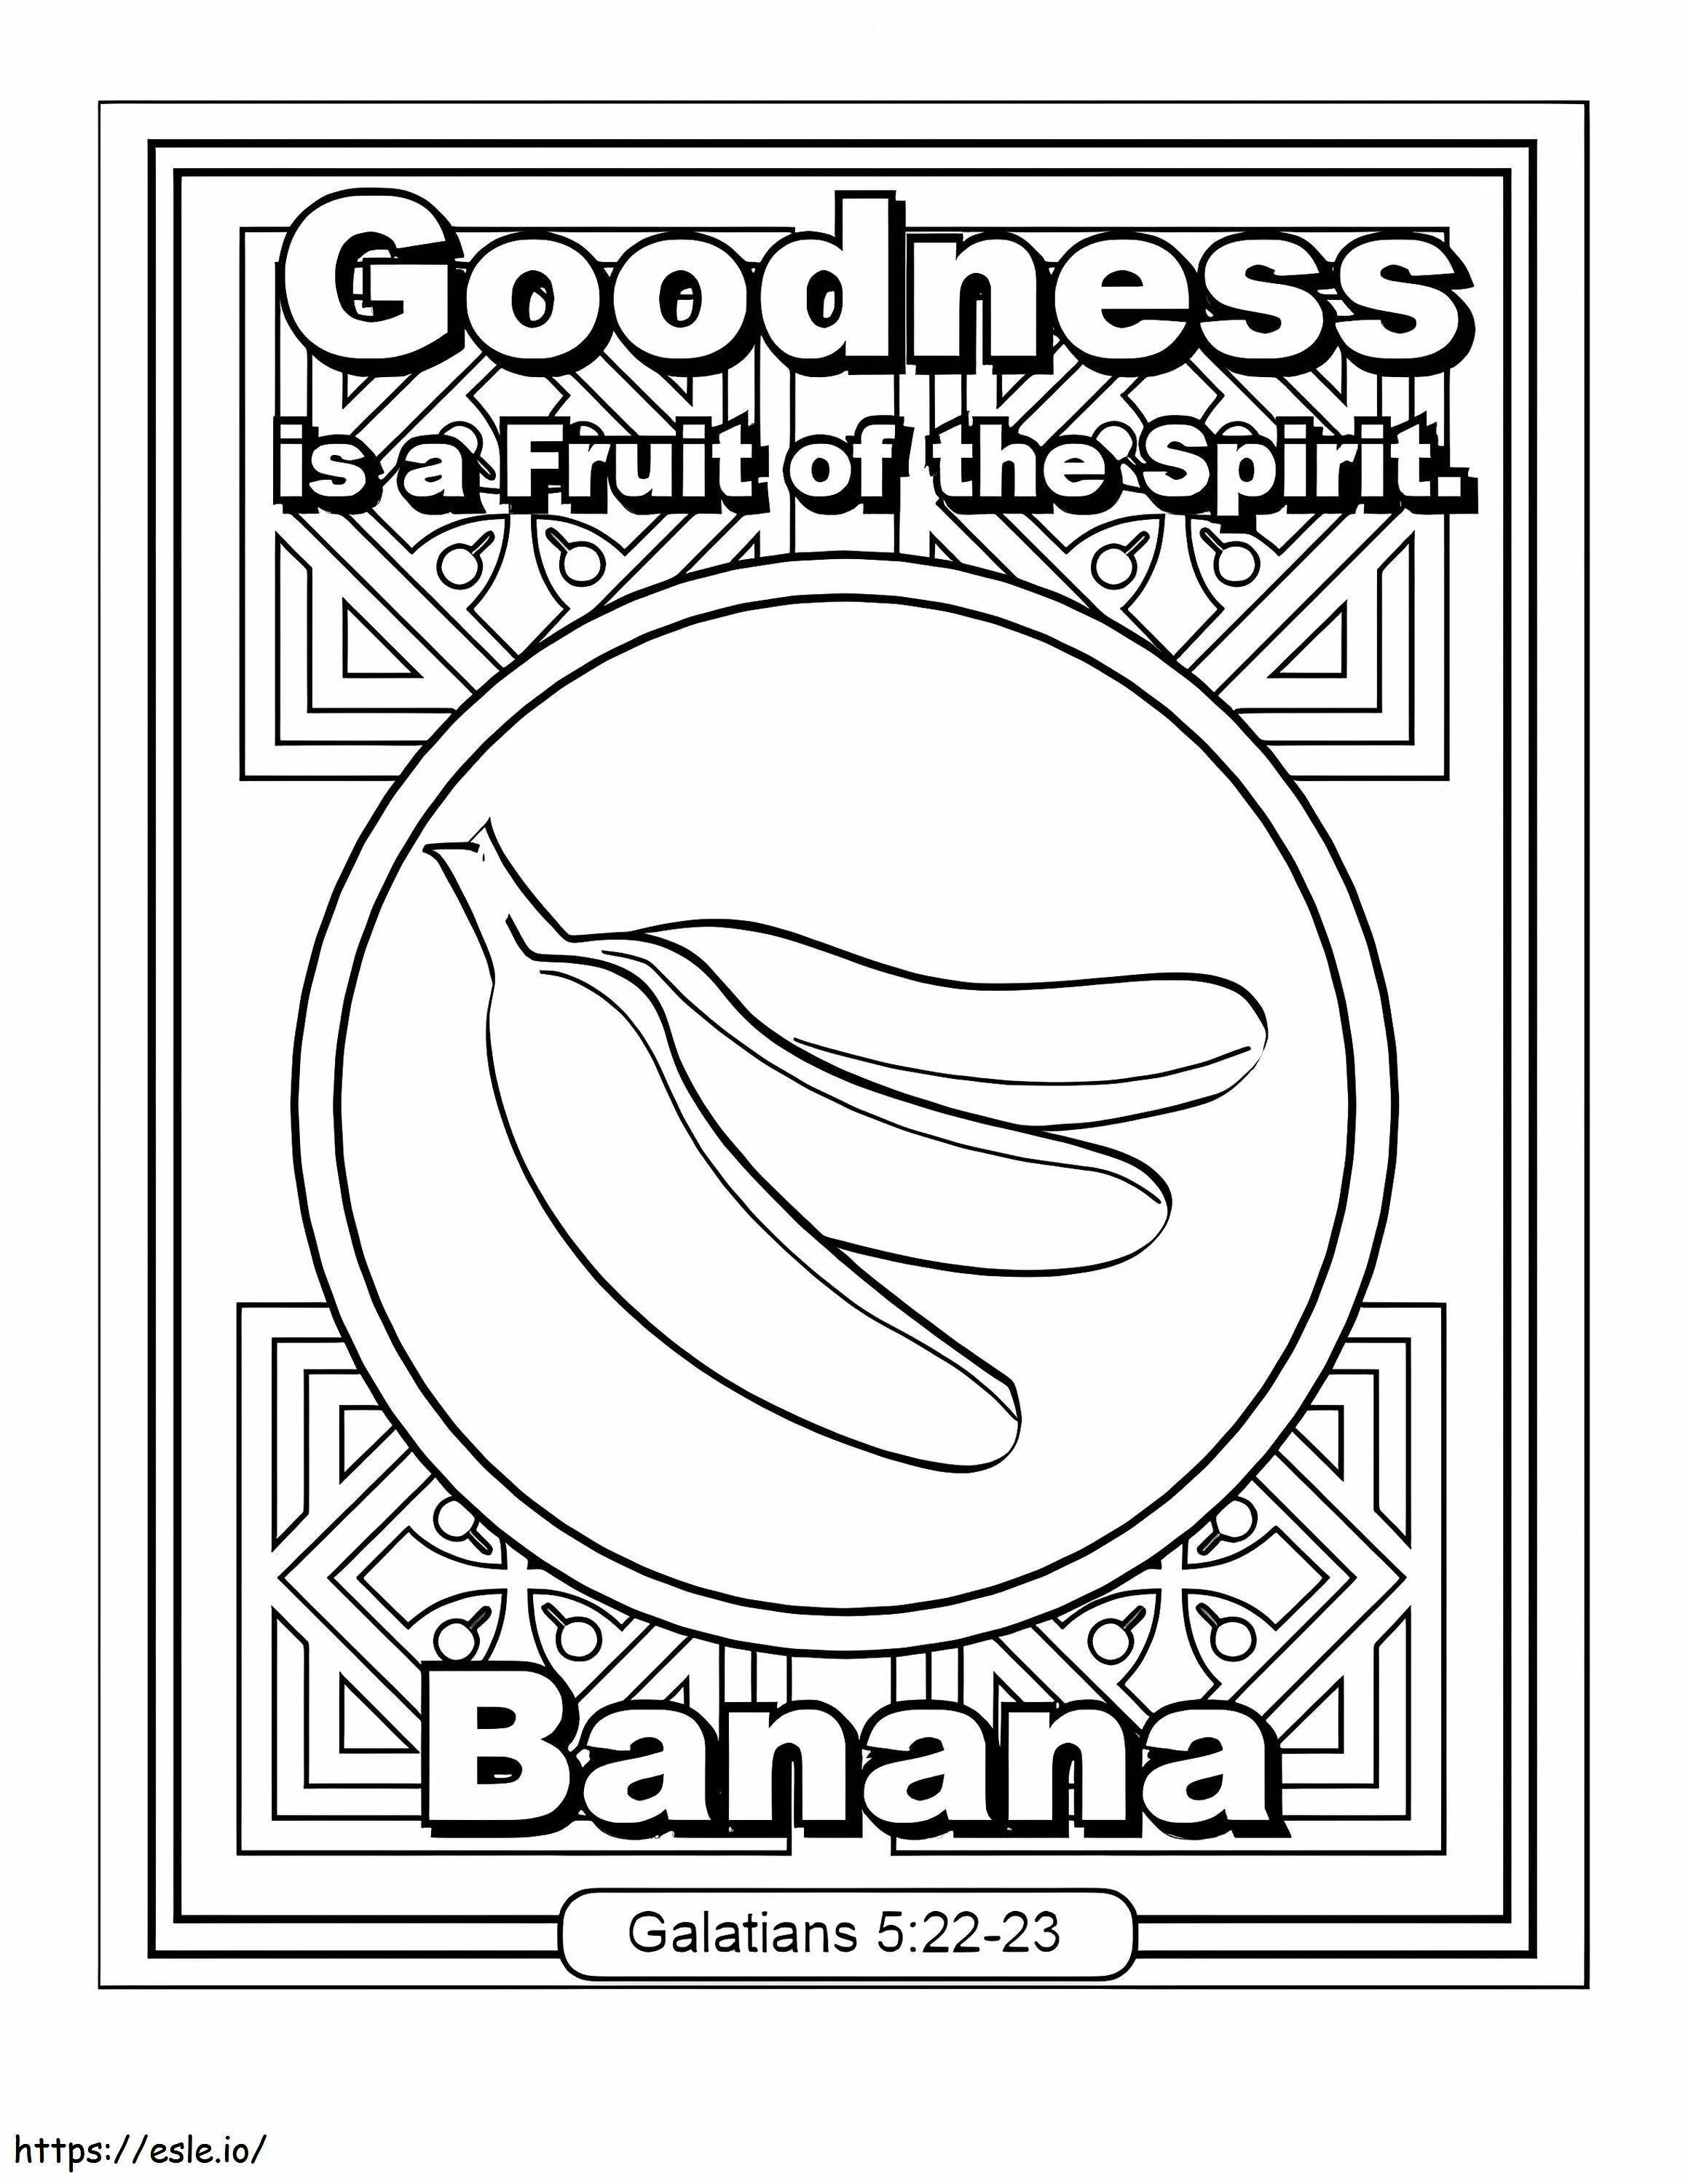 Goodness Fruit Of The Spirit coloring page